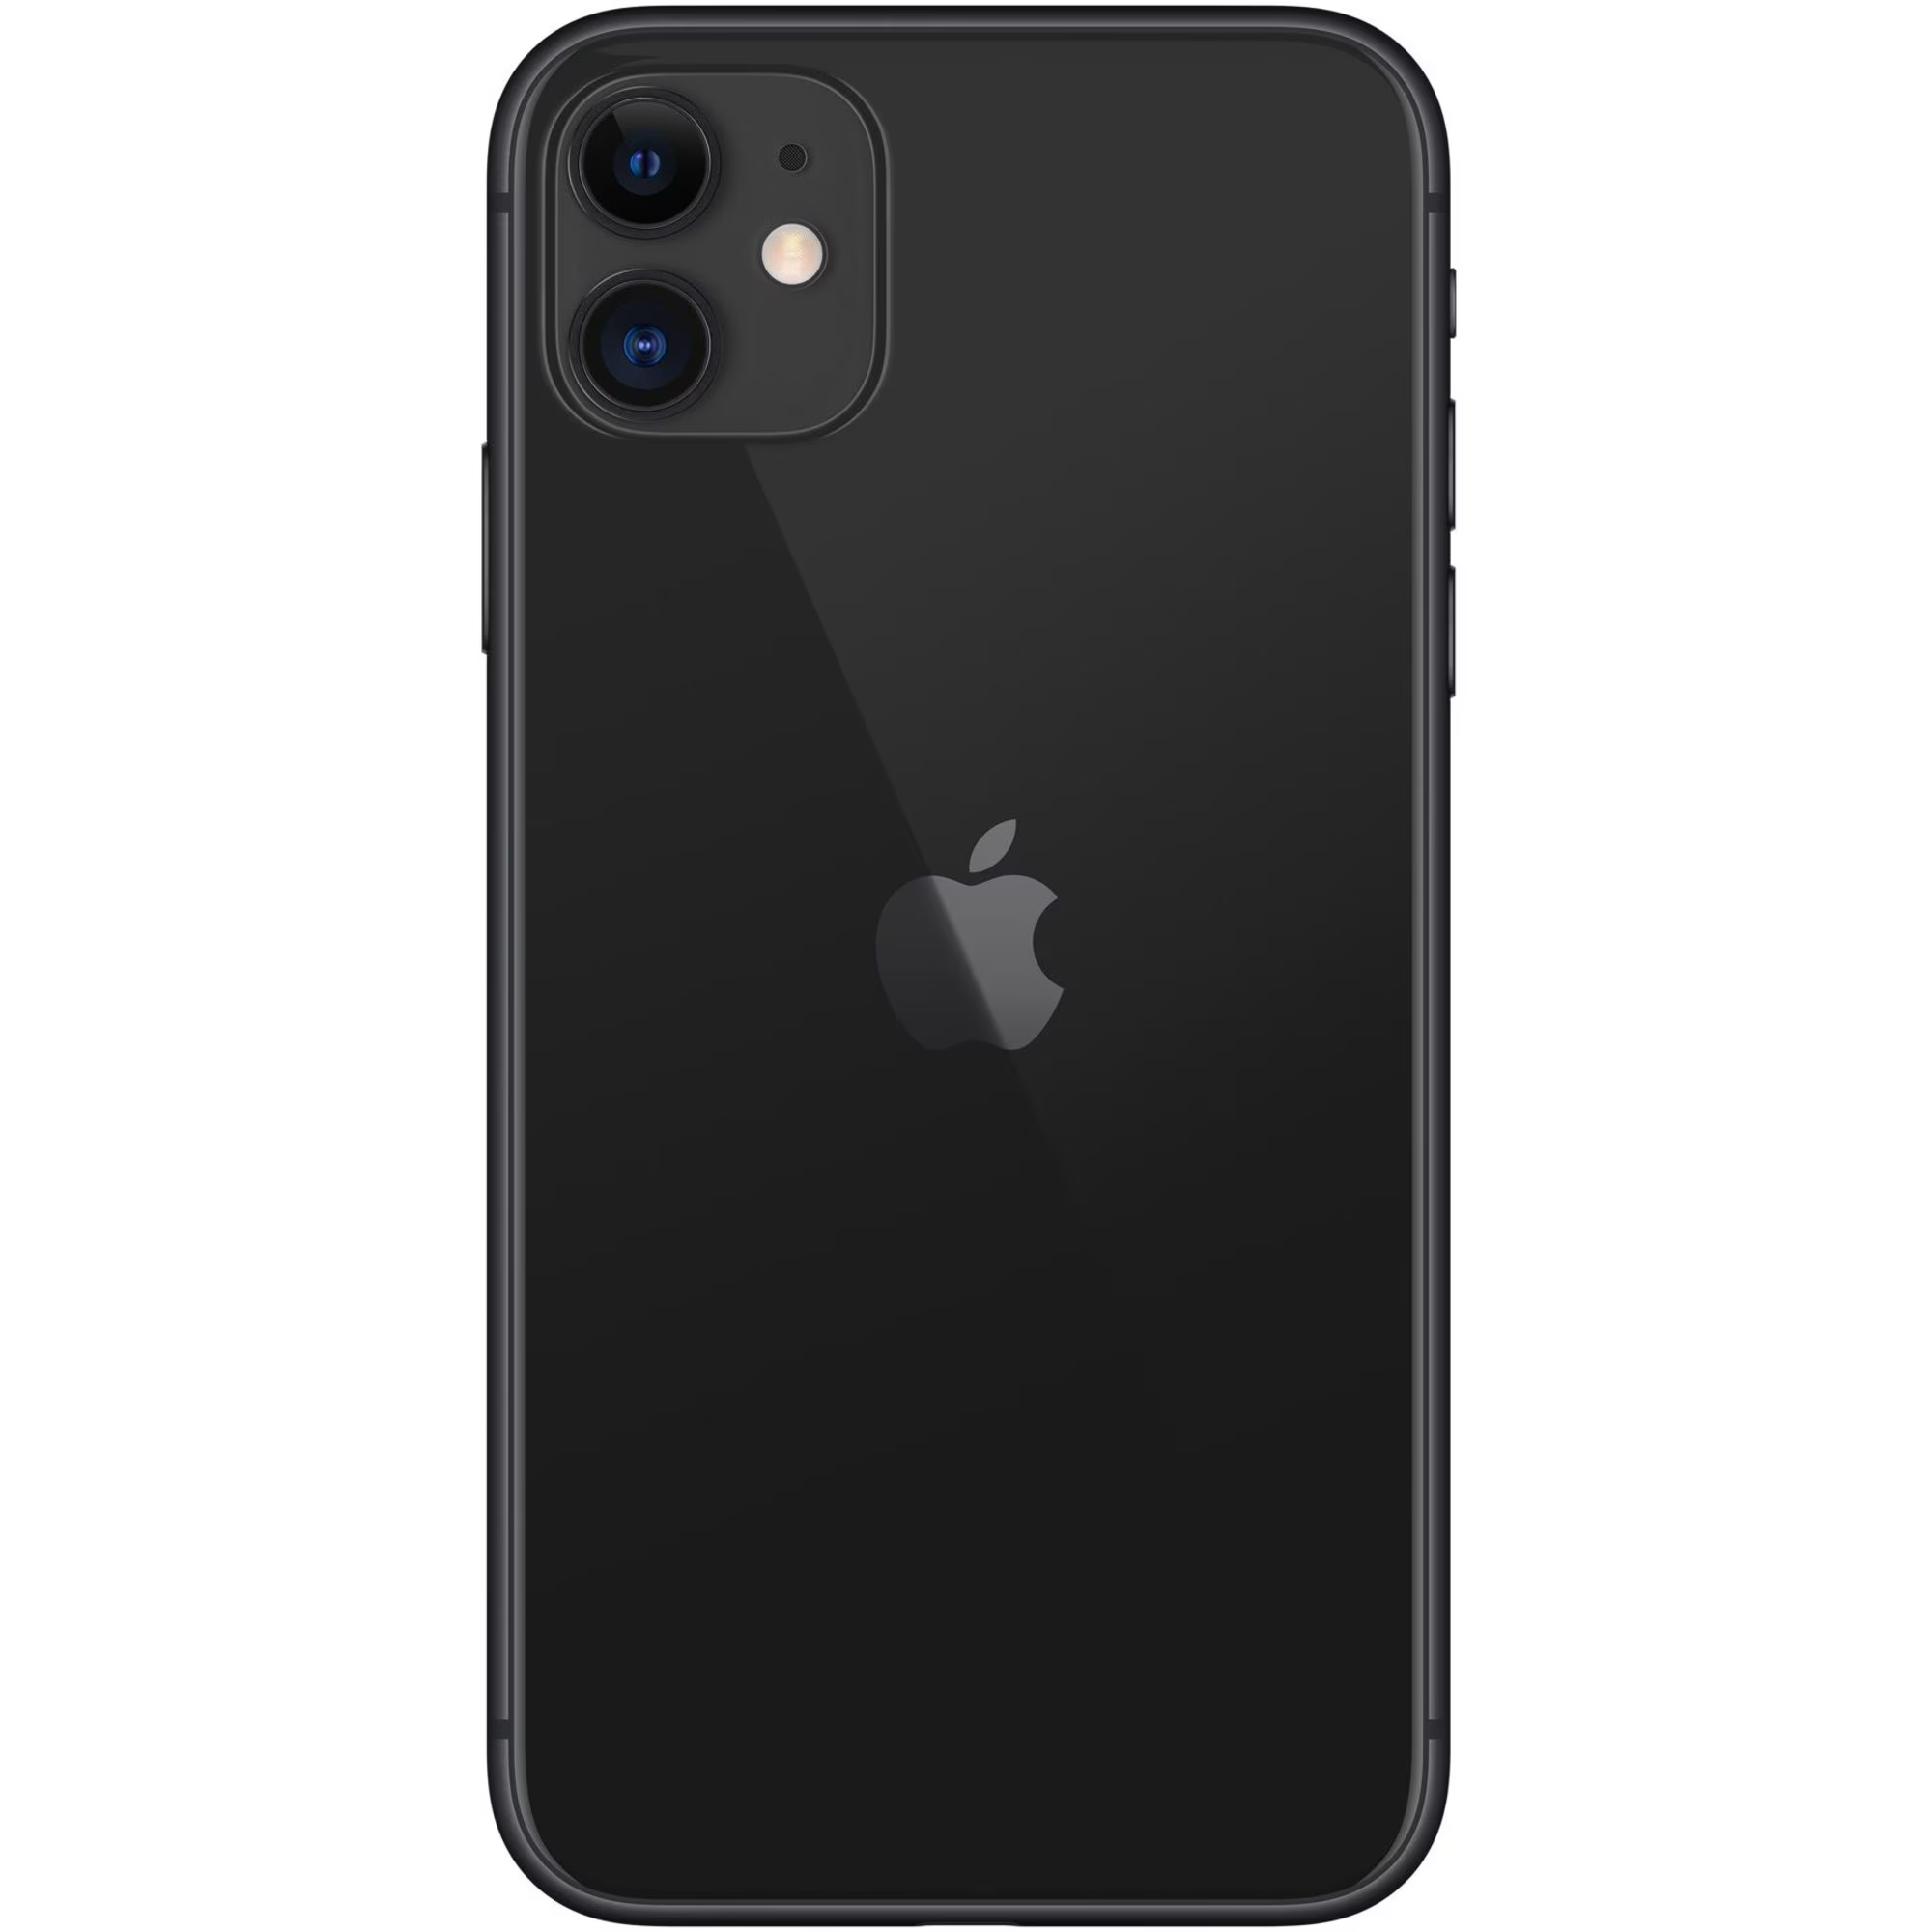 iPhone 11 (64gb) - BLACK – Strictly Apple Store